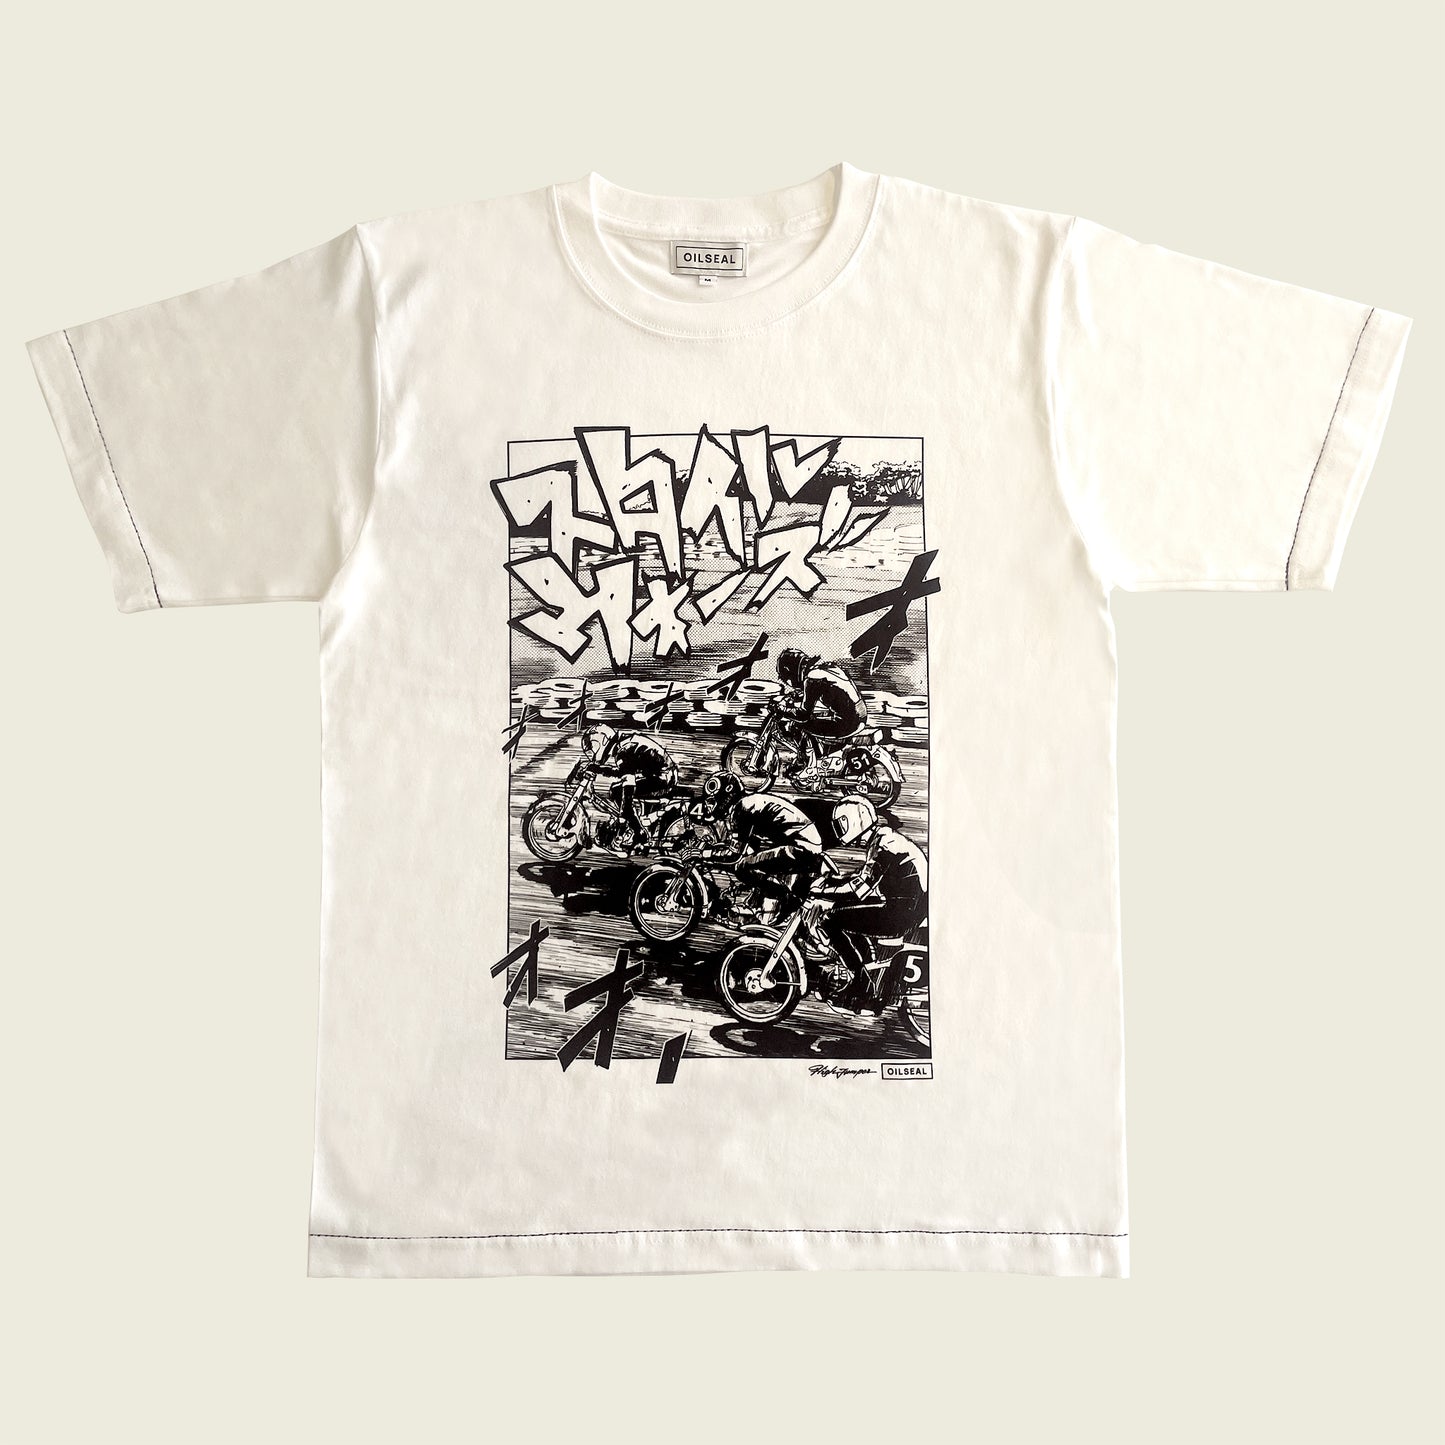 OILSEAL STYLE WARS T-SHIRT